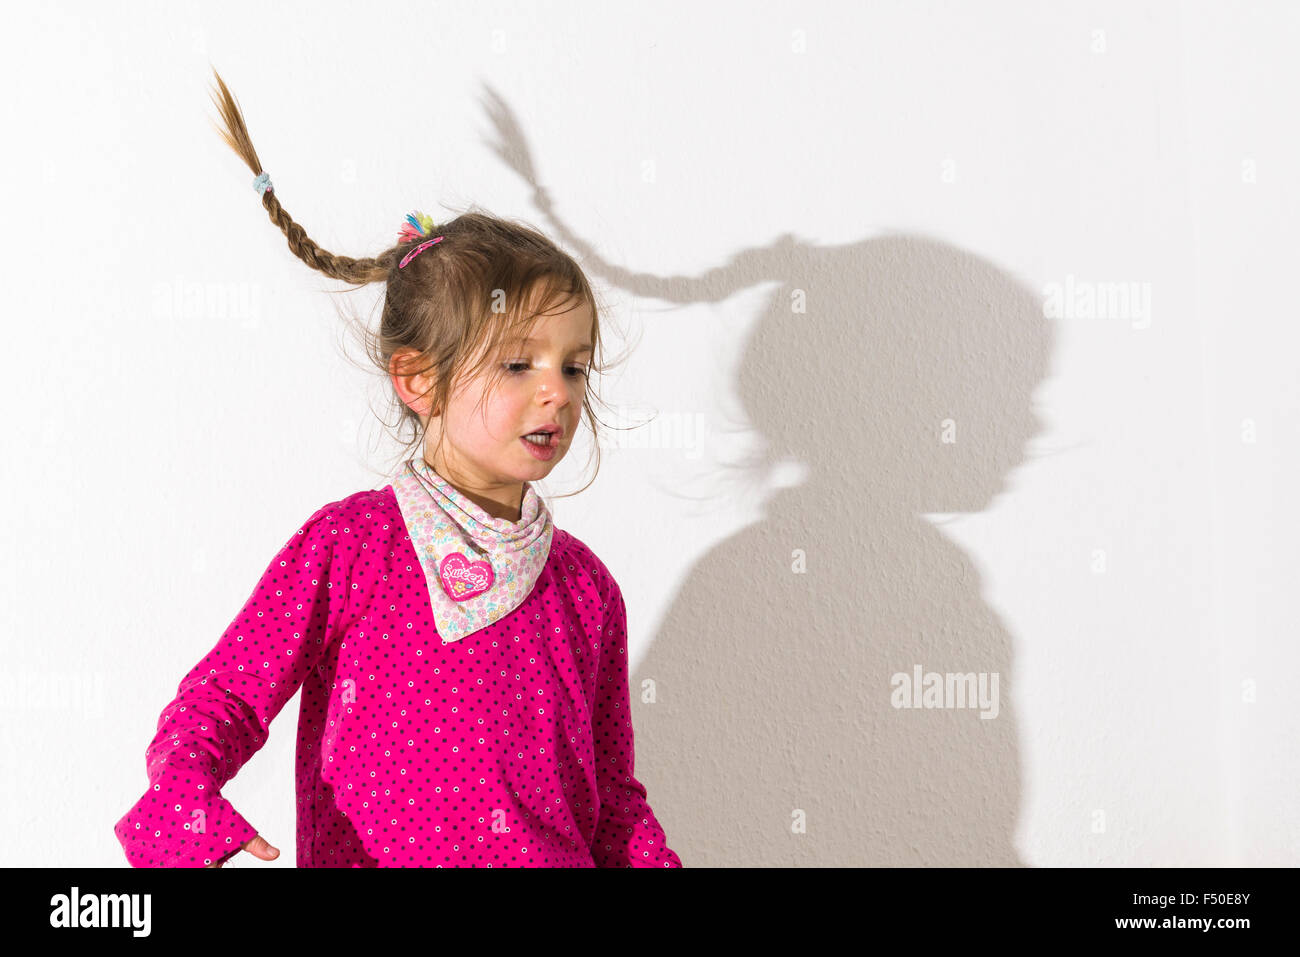 A blond three year old girl, wearing a pink shirt, is dancing in front of a white wall, leaving her shadow behind her Stock Photo